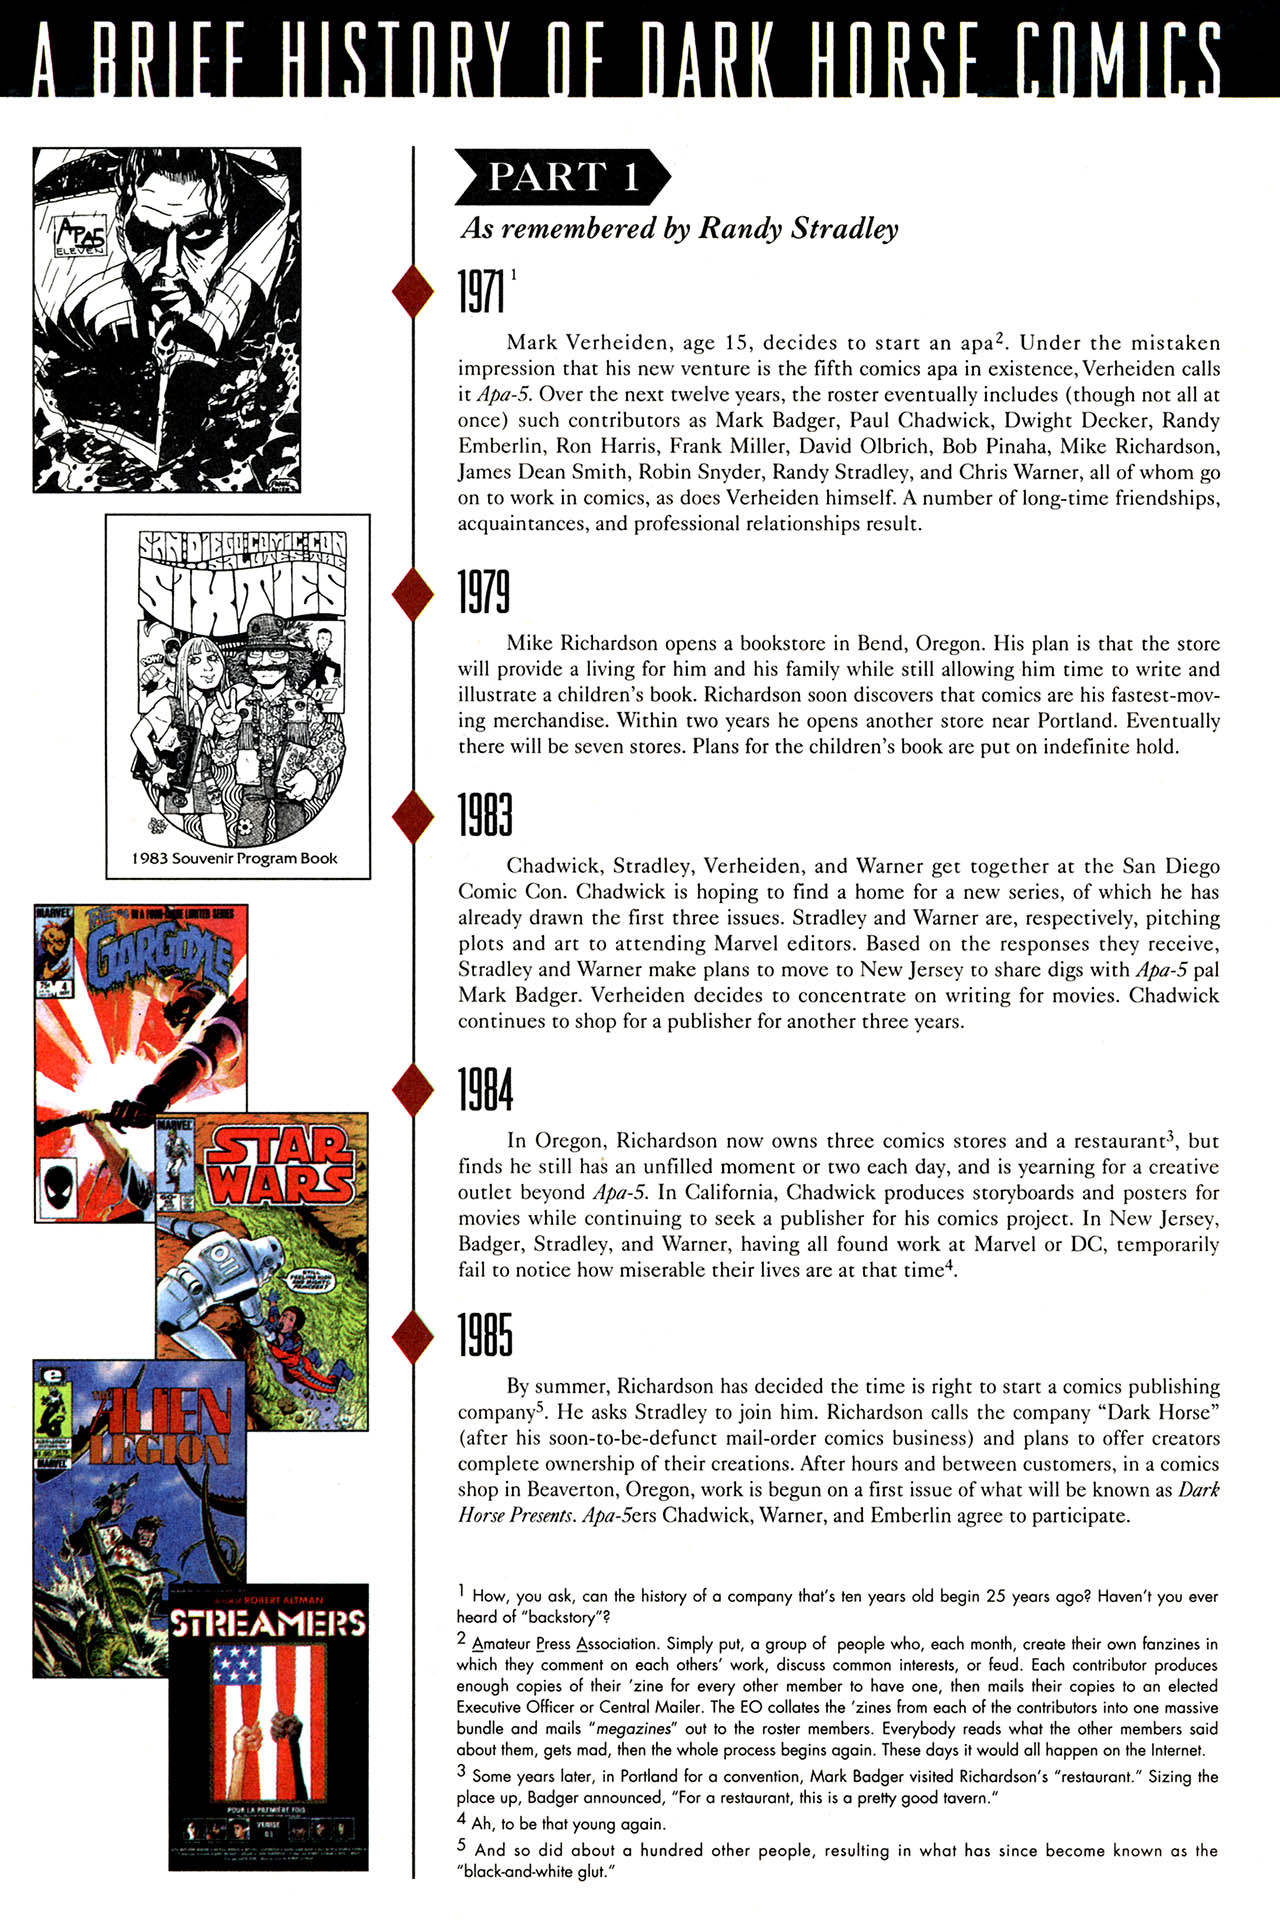 Read online A Decade of Dark Horse comic -  Issue #1 - 11